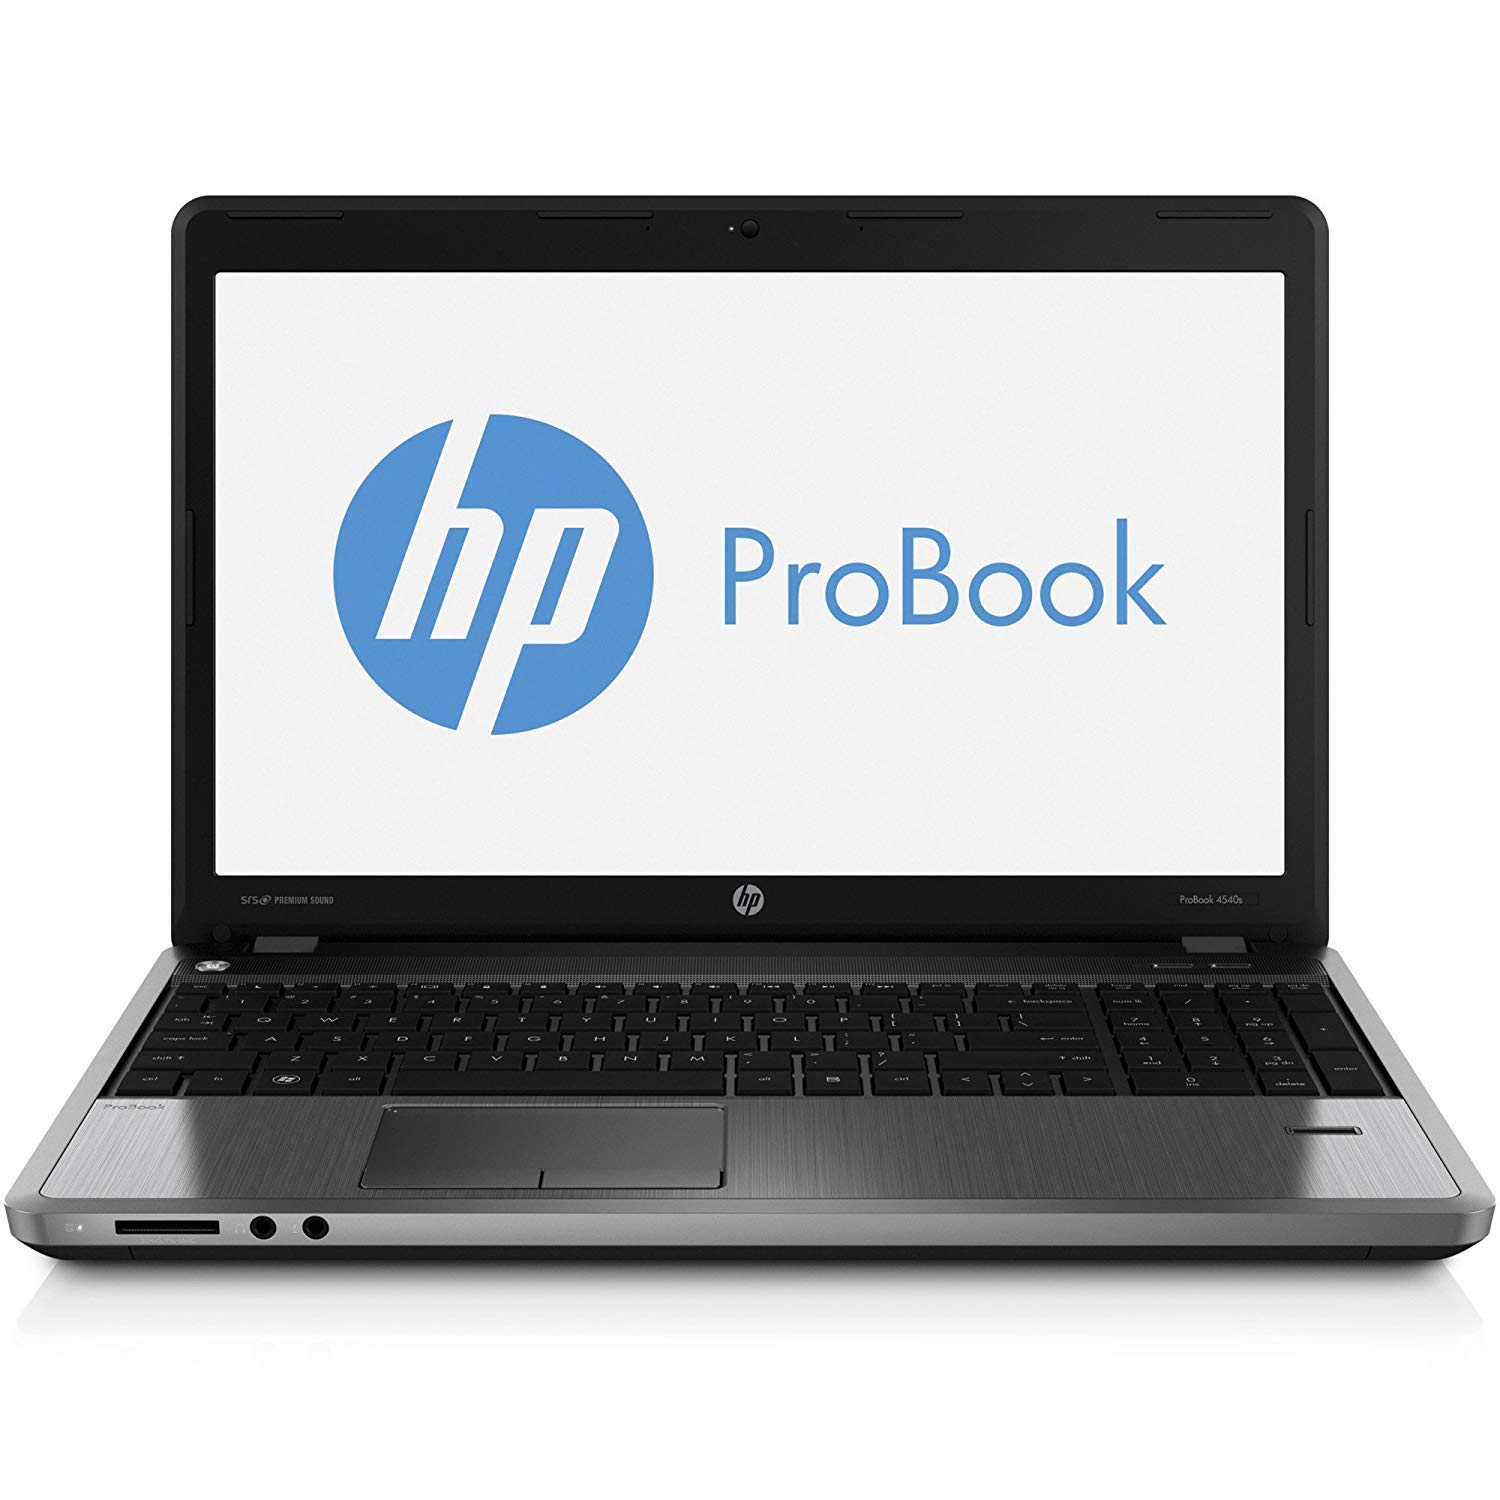 Install mac os x on hp probook 4540s specifications windows 10